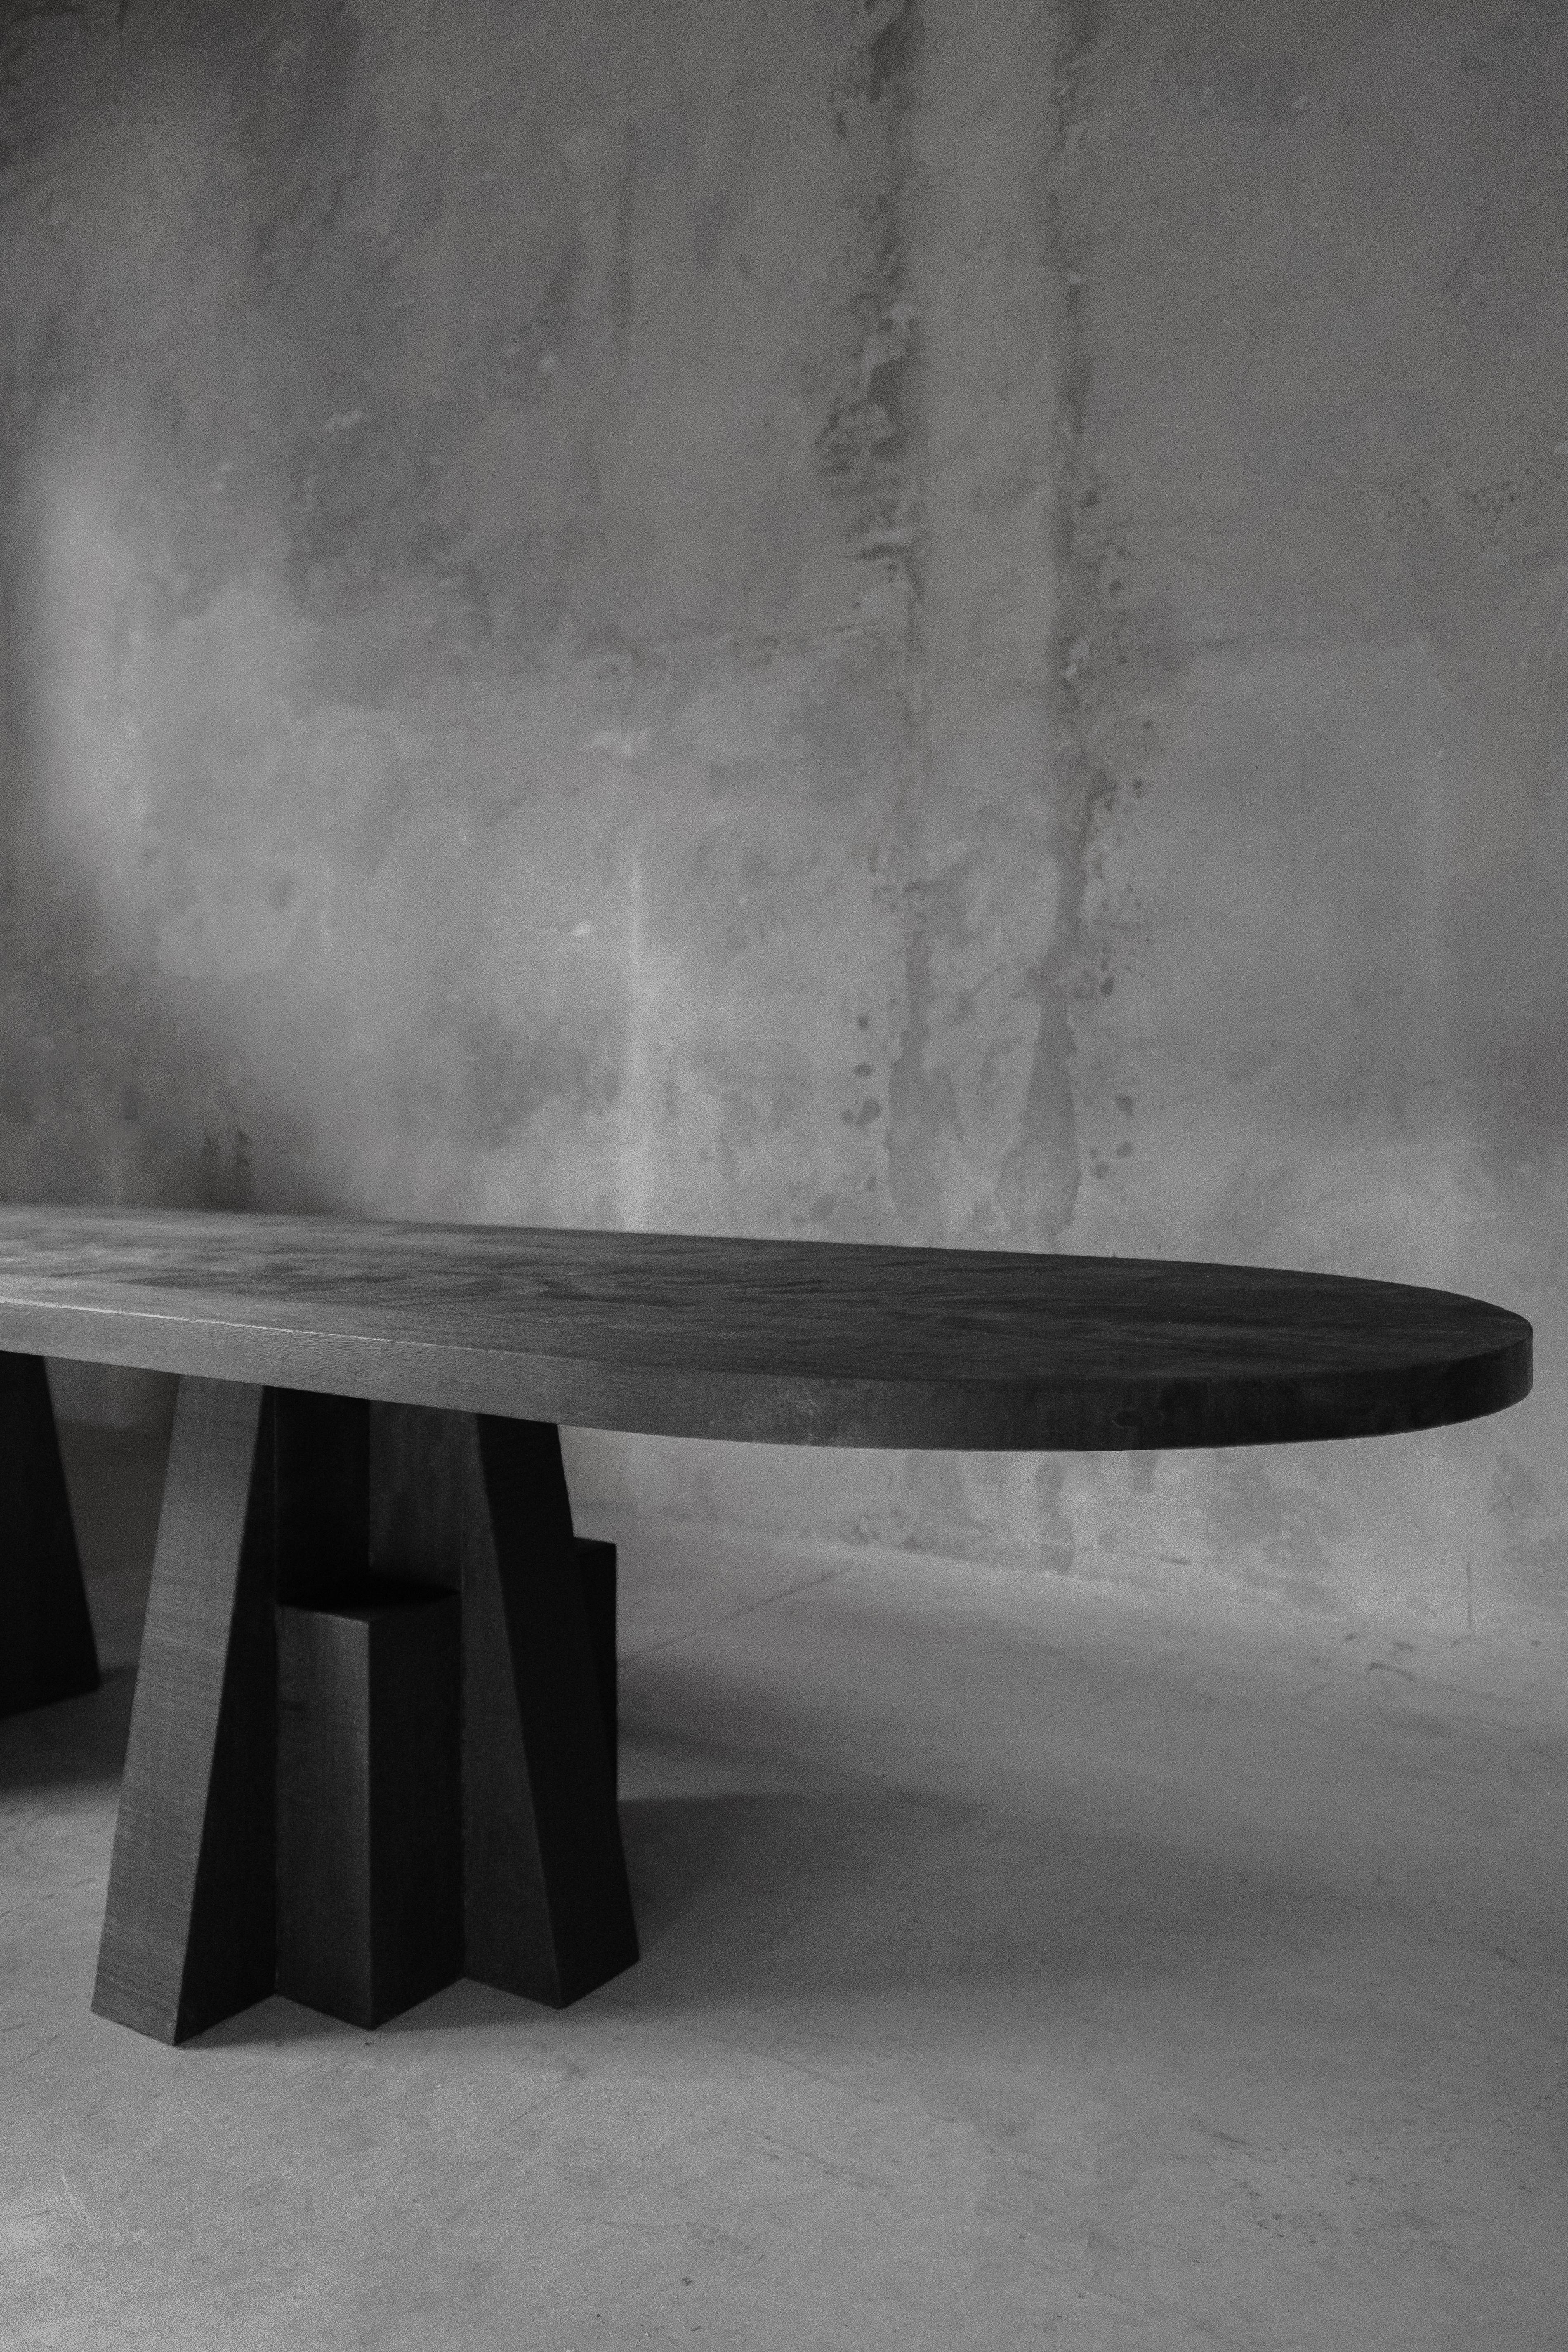 AD black oak dining table - hand-sculpted - signed Arno Declercq
AD Table 2.0
Small - 340 cm W x 73 cm H x 105 cm D // 133,86” W x 28,7” H x 41,3” D
Large - 340 cm W x 73 cm H x 120 cm D // 133,86” W x 28,7” H x 47,2” D
Belgium